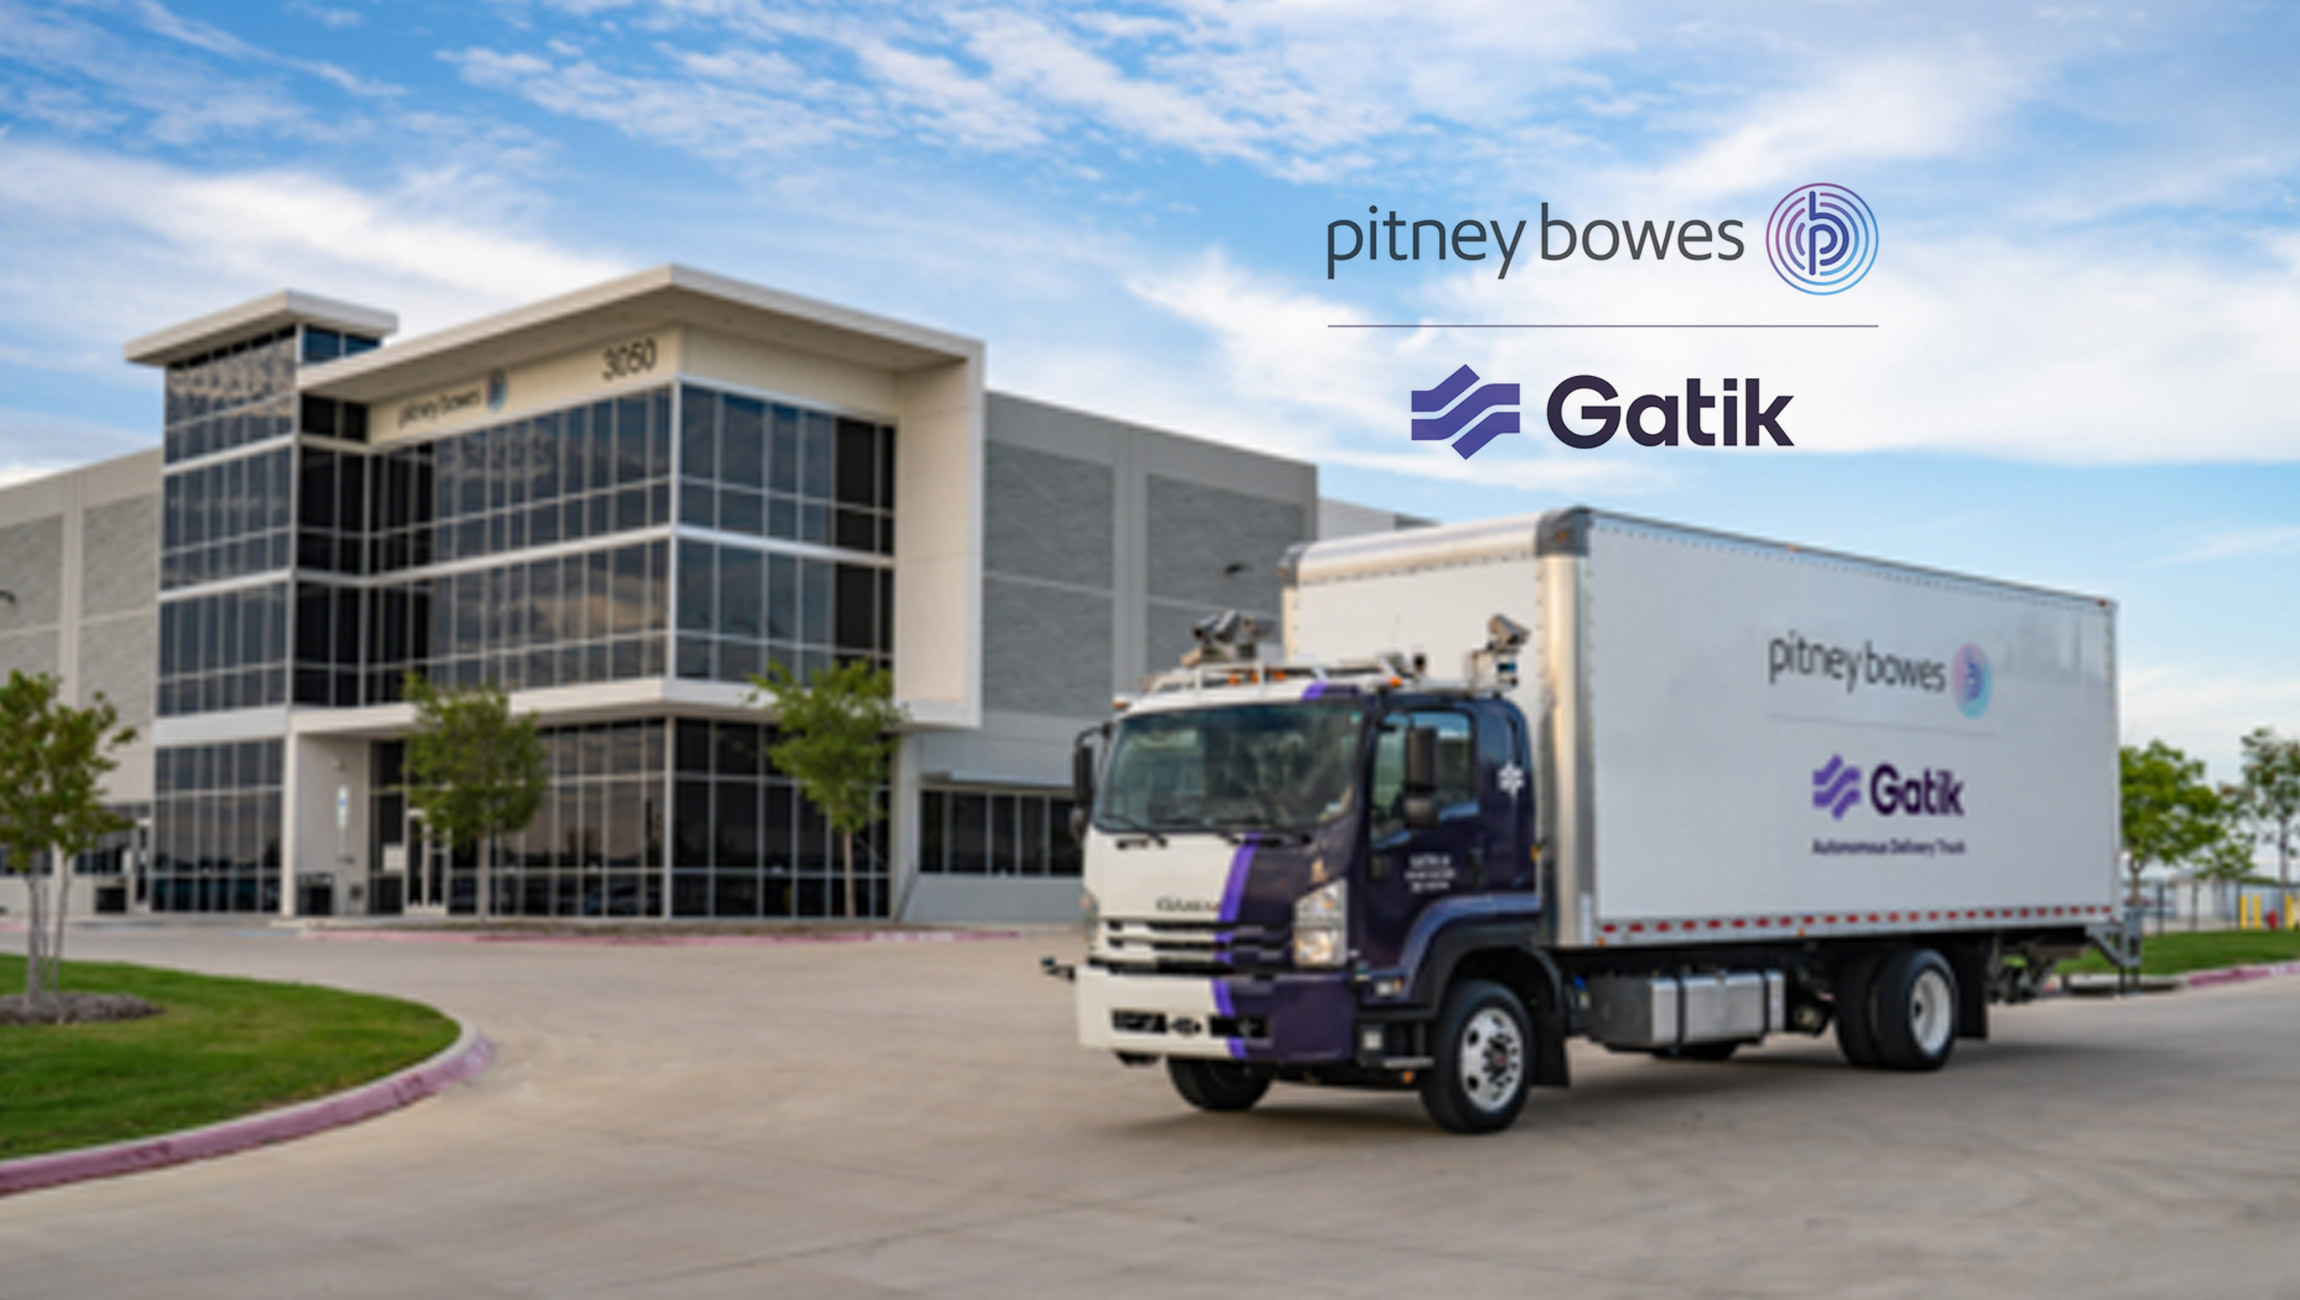 Pitney Bowes Launches PitneyShip Cube, the First-of-Its-Kind Shipping Label Printer With Built-In Scale